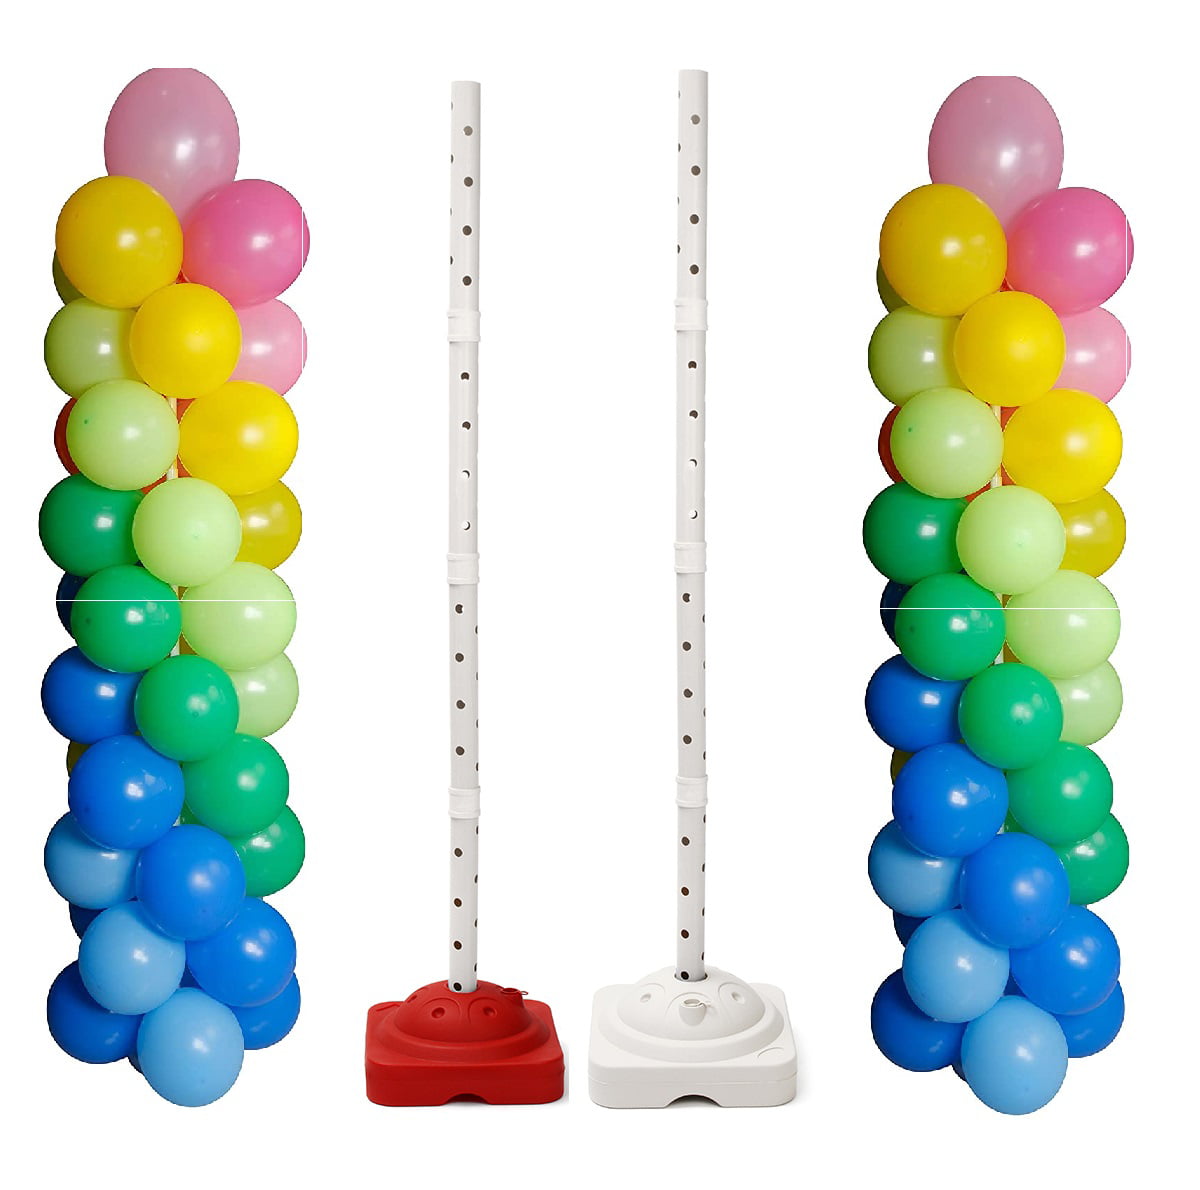 NEW Balloon Arch Kit Clamp Display Base Holder Pole Stand Support for Party Life 